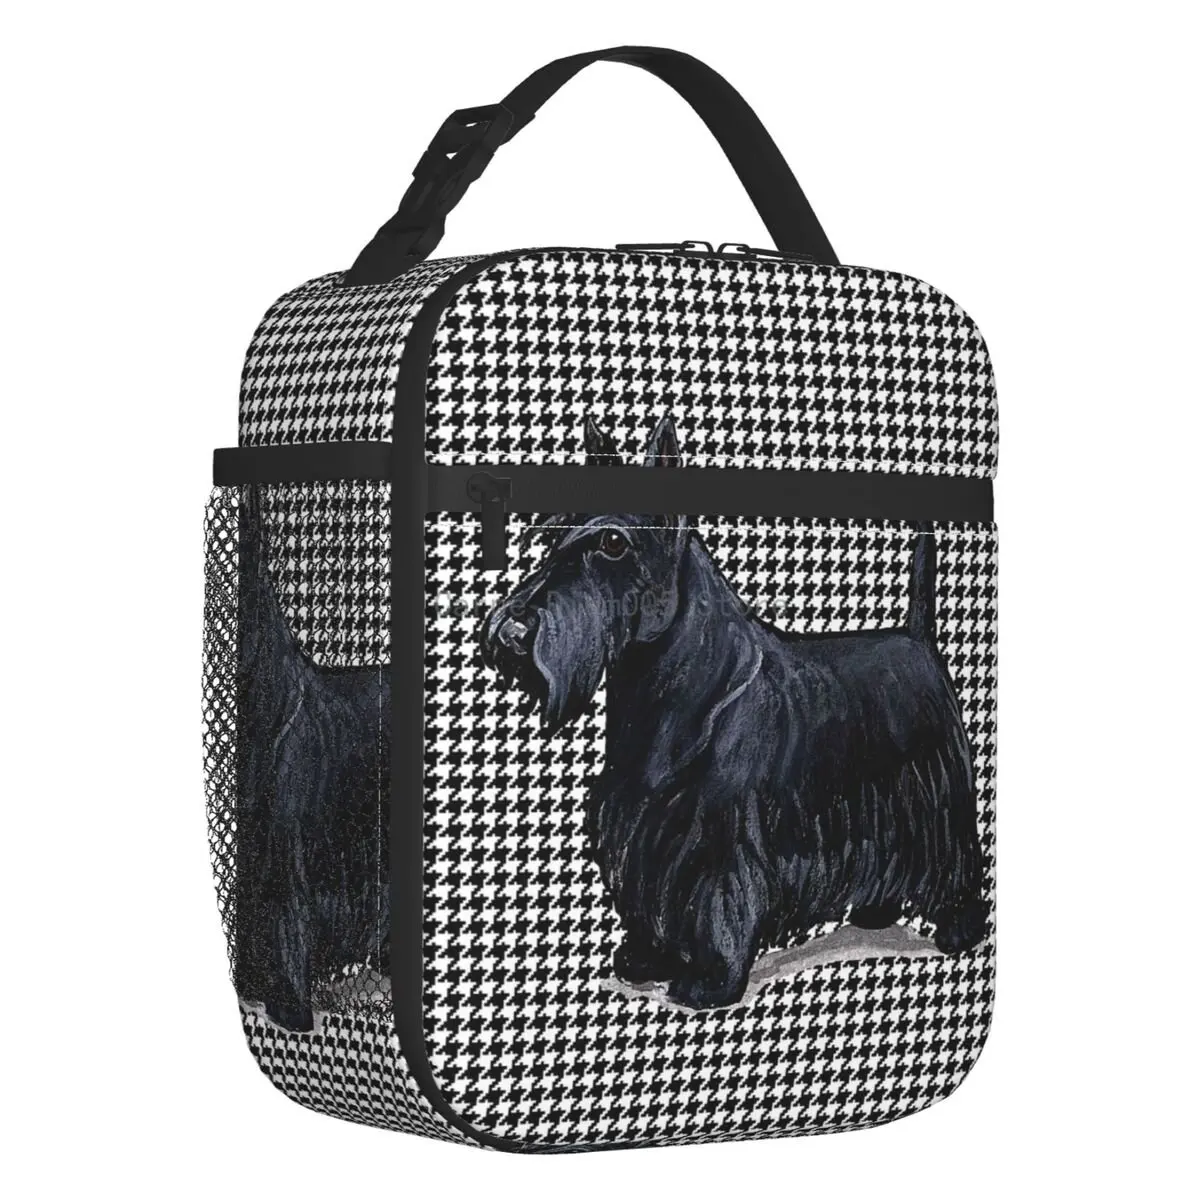 

Scottish Terrier Houndstooth Insulated Lunch Bags Pet Scottie Dog Portable Thermal Cooler Food Lunch Box Work School Travel